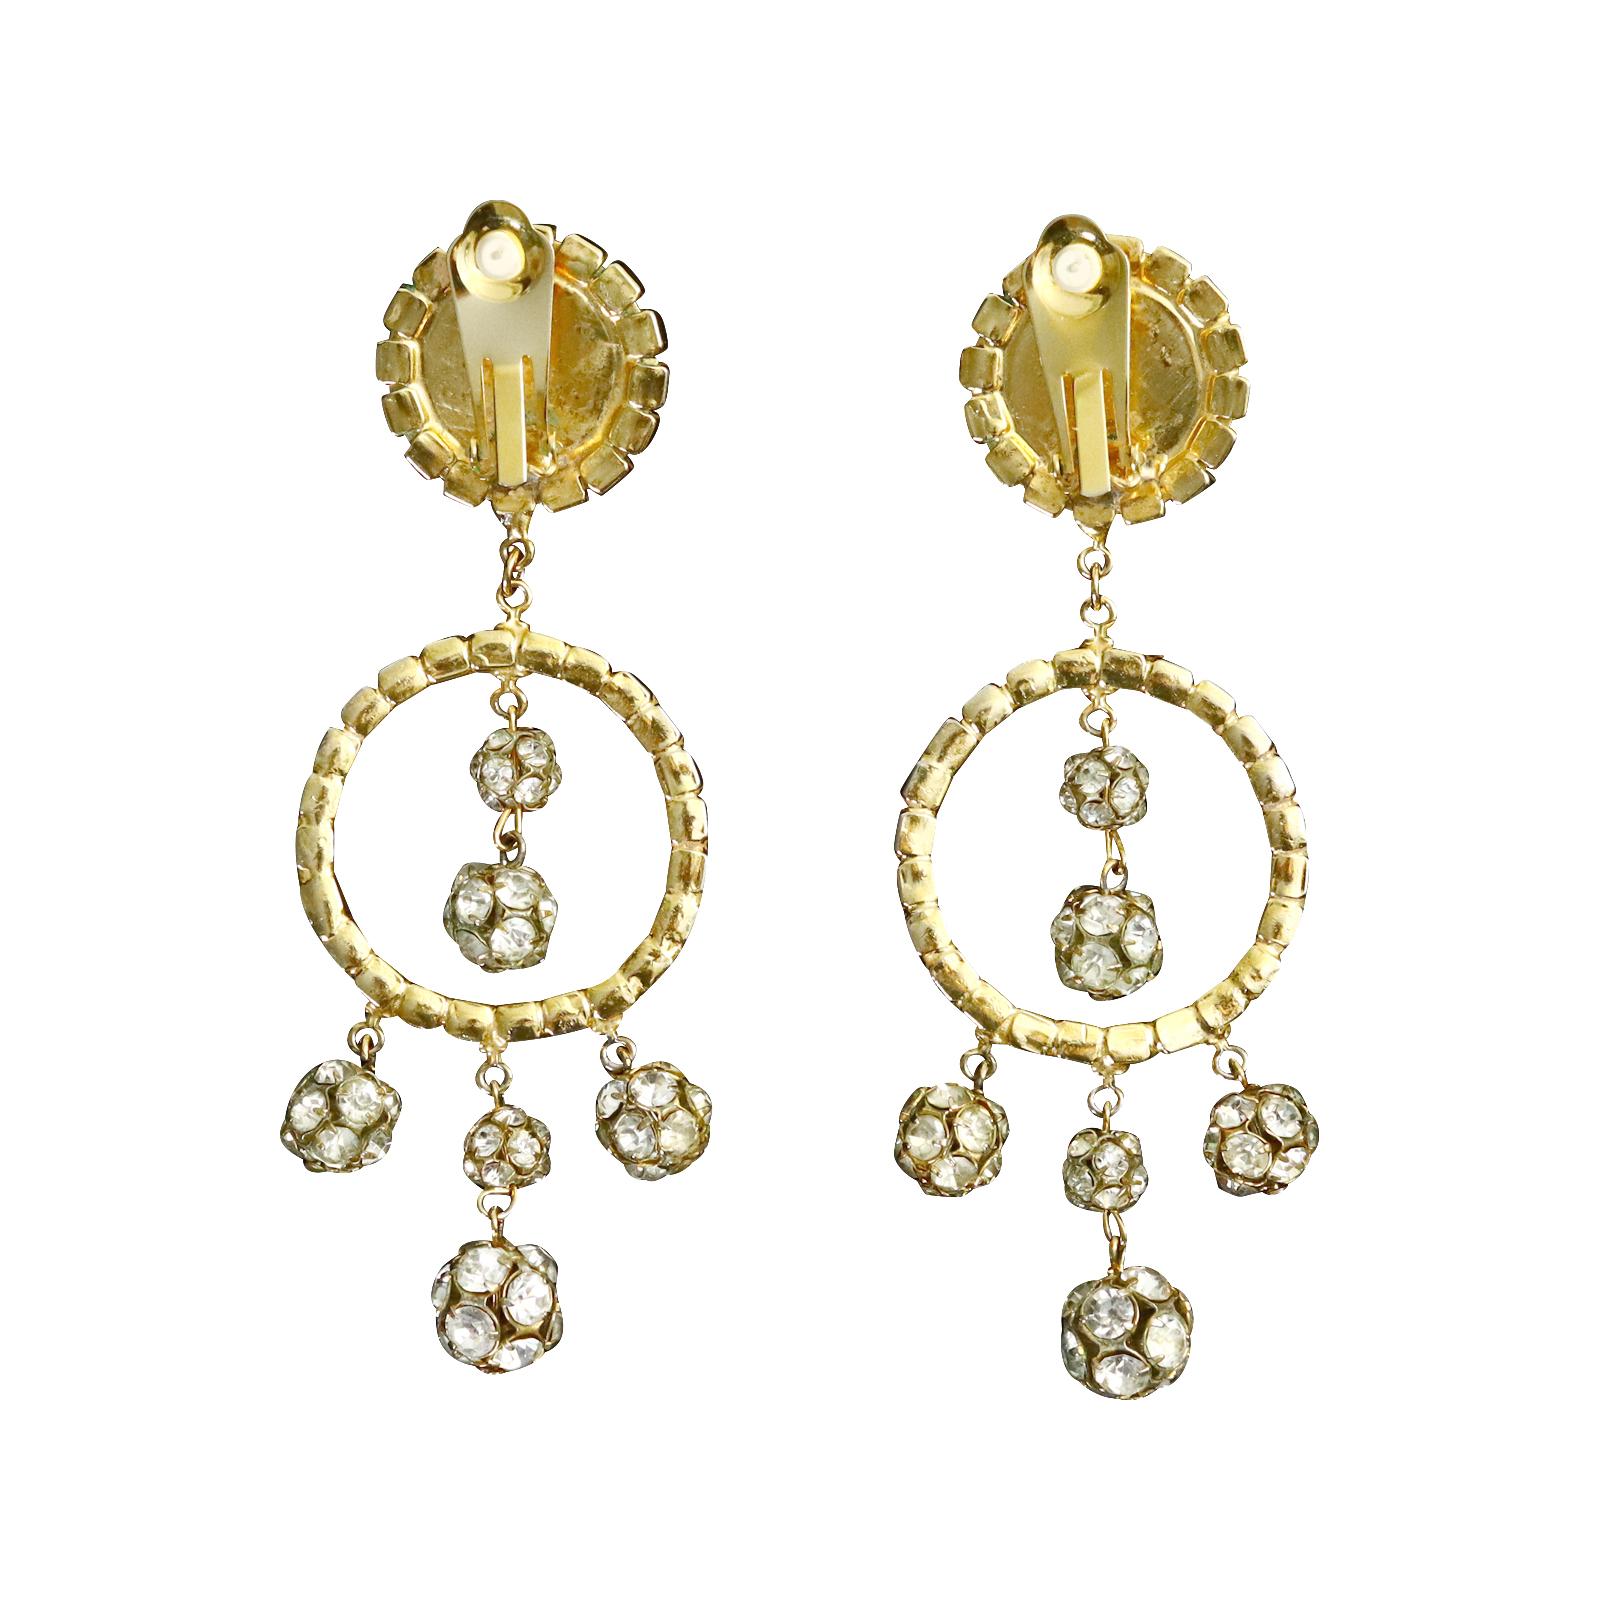 Modern Vintage Gold Tone Diamante Long Dangling Earrings with Rondelles, Circa 1960s For Sale